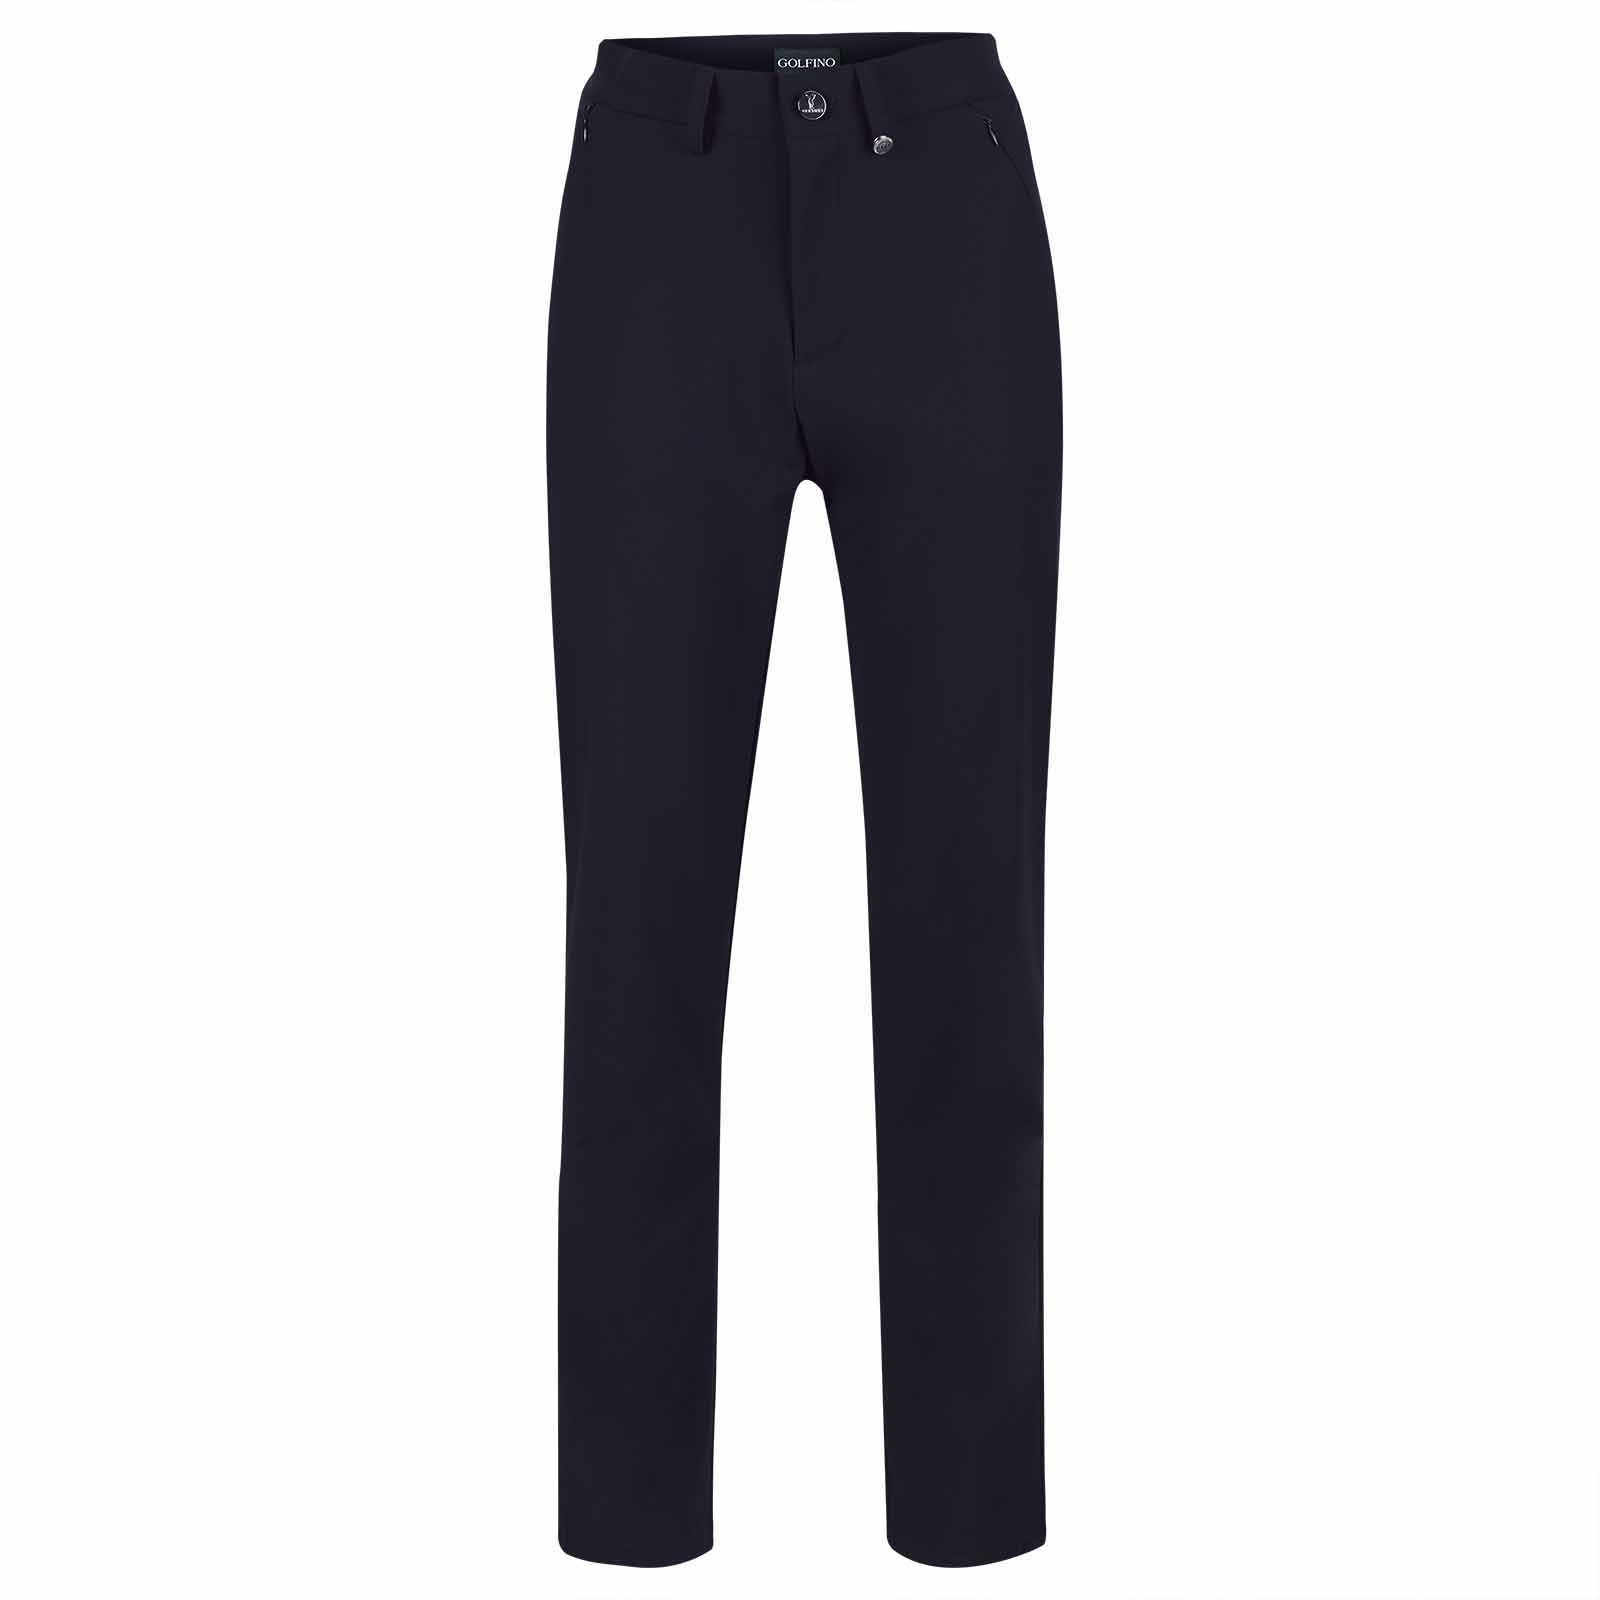 Ladies' 7/8 golf pants, quick-drying, made from lightweight stretch material